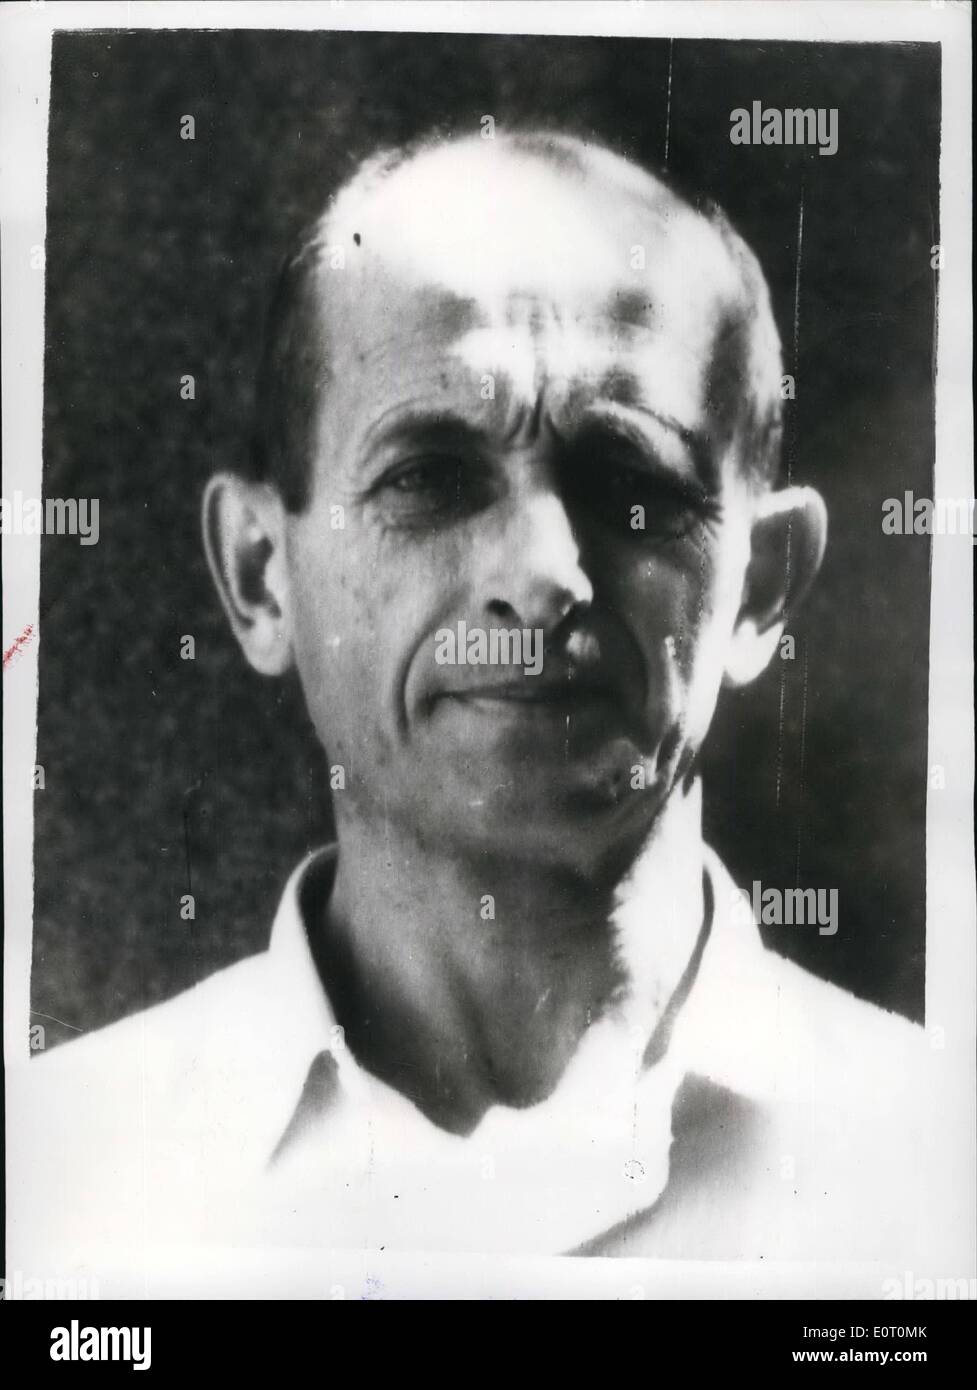 Jun. 06, 1960 - First Portrait of Adolf Eichmann since capture by Israeli intelligence agents: This is the first portrait of Adolf Eichmann former Nazi SS Colonel claimed to be the world's most notorious killer issued today by his captors - Israeli secret service men. He is accused of organising the horrifying efficient system of mas extermination of Jews between the years 1938 - 1945 by gas chamber and other methods. Eichmann who is now 53 was arrested in the Argentine by secret agents of the Israeli Government after months of careful investigation. Stock Photo